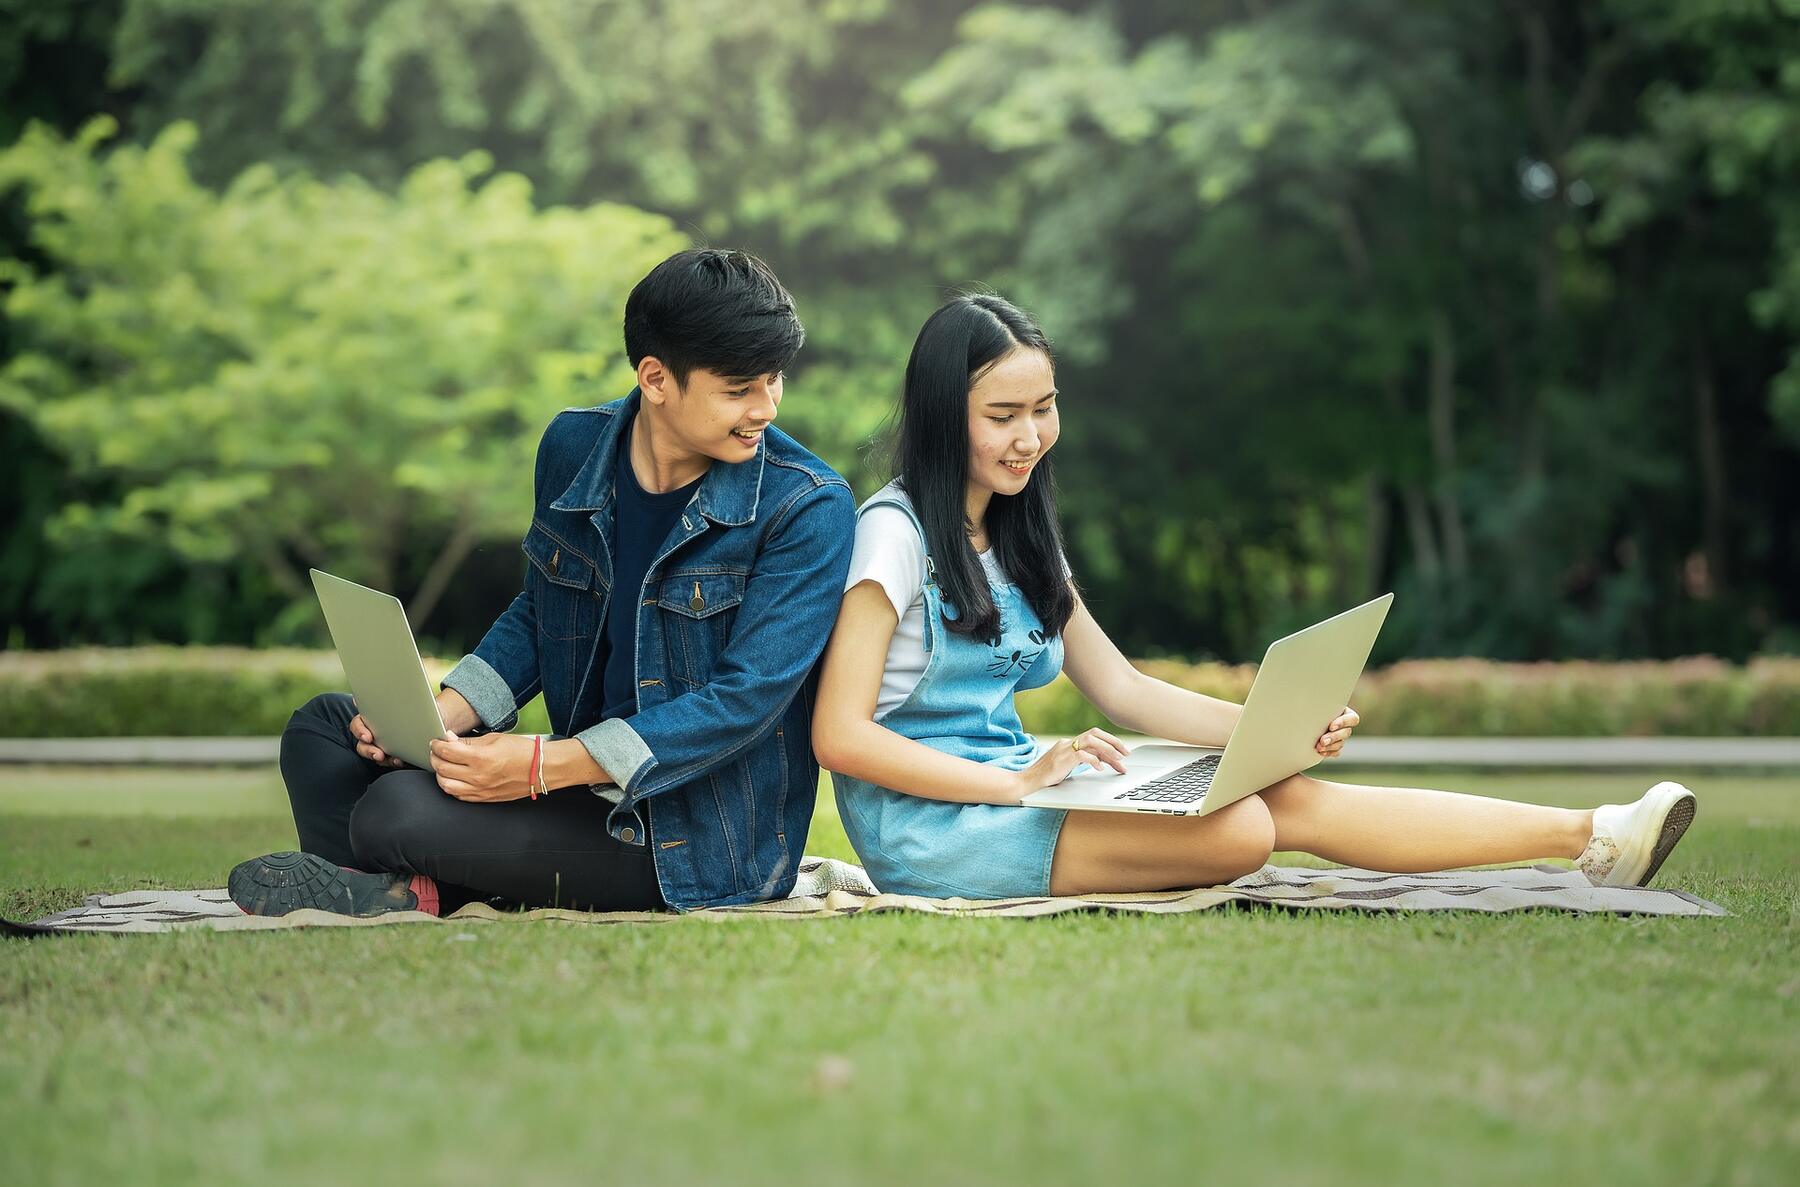 Students sitting on the grass in the park, engrossed in their laptop, enjoying the outdoors